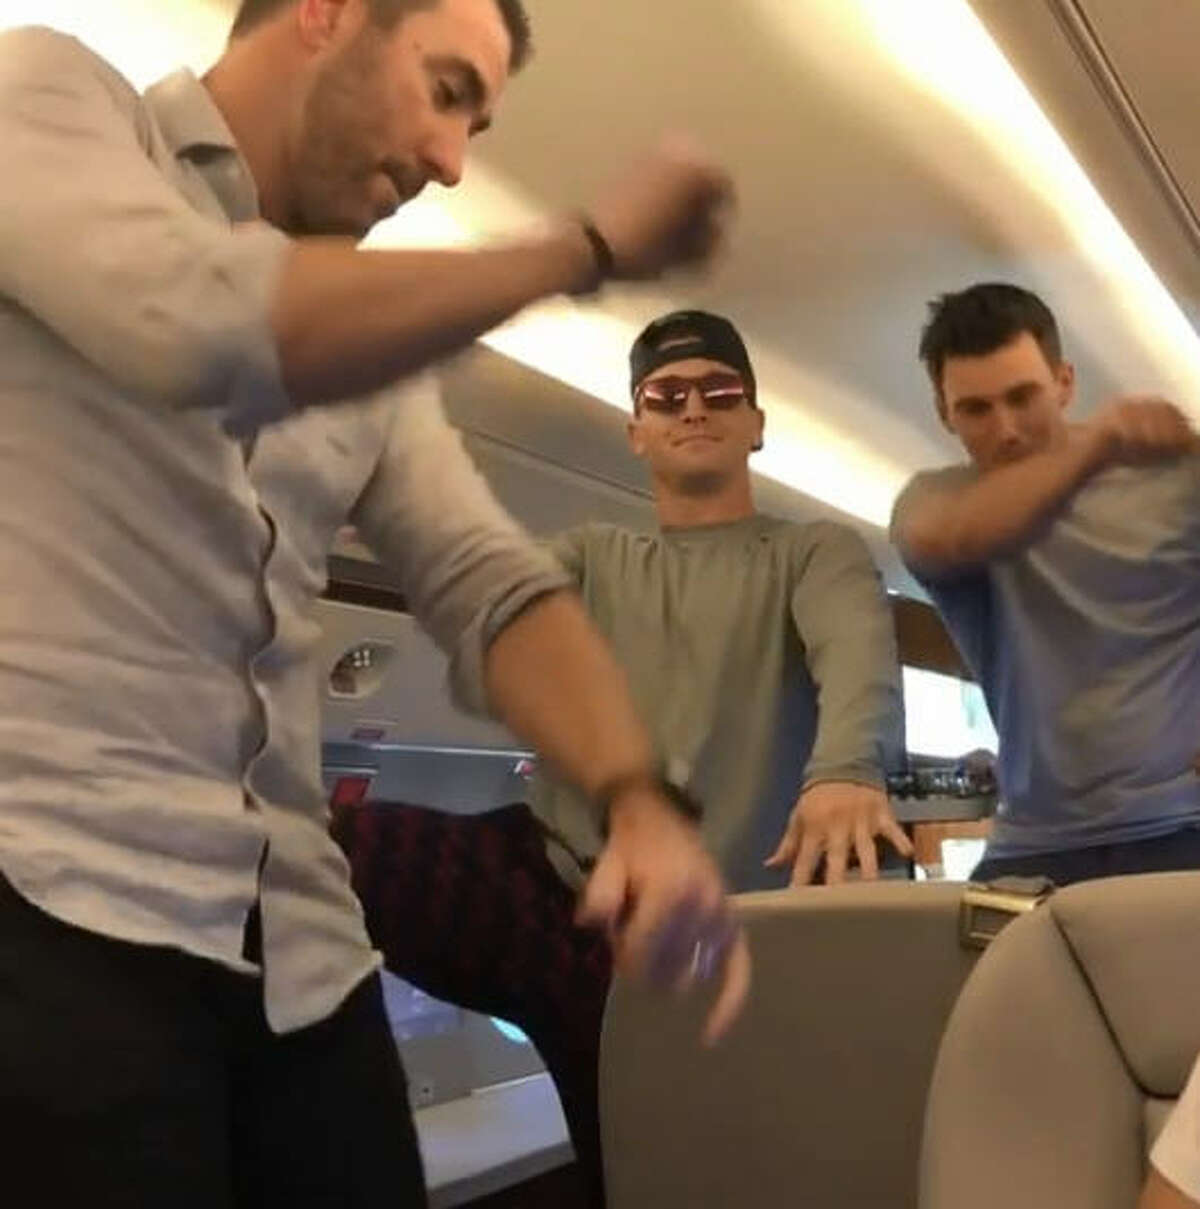 Astros Justin Verlander and Alex Bregman loosened up ahead of Tuesday's All-Star Game by joining rapper Drake's "In My Feelings" challenge over the weekend. Via Bregman's Instagram.